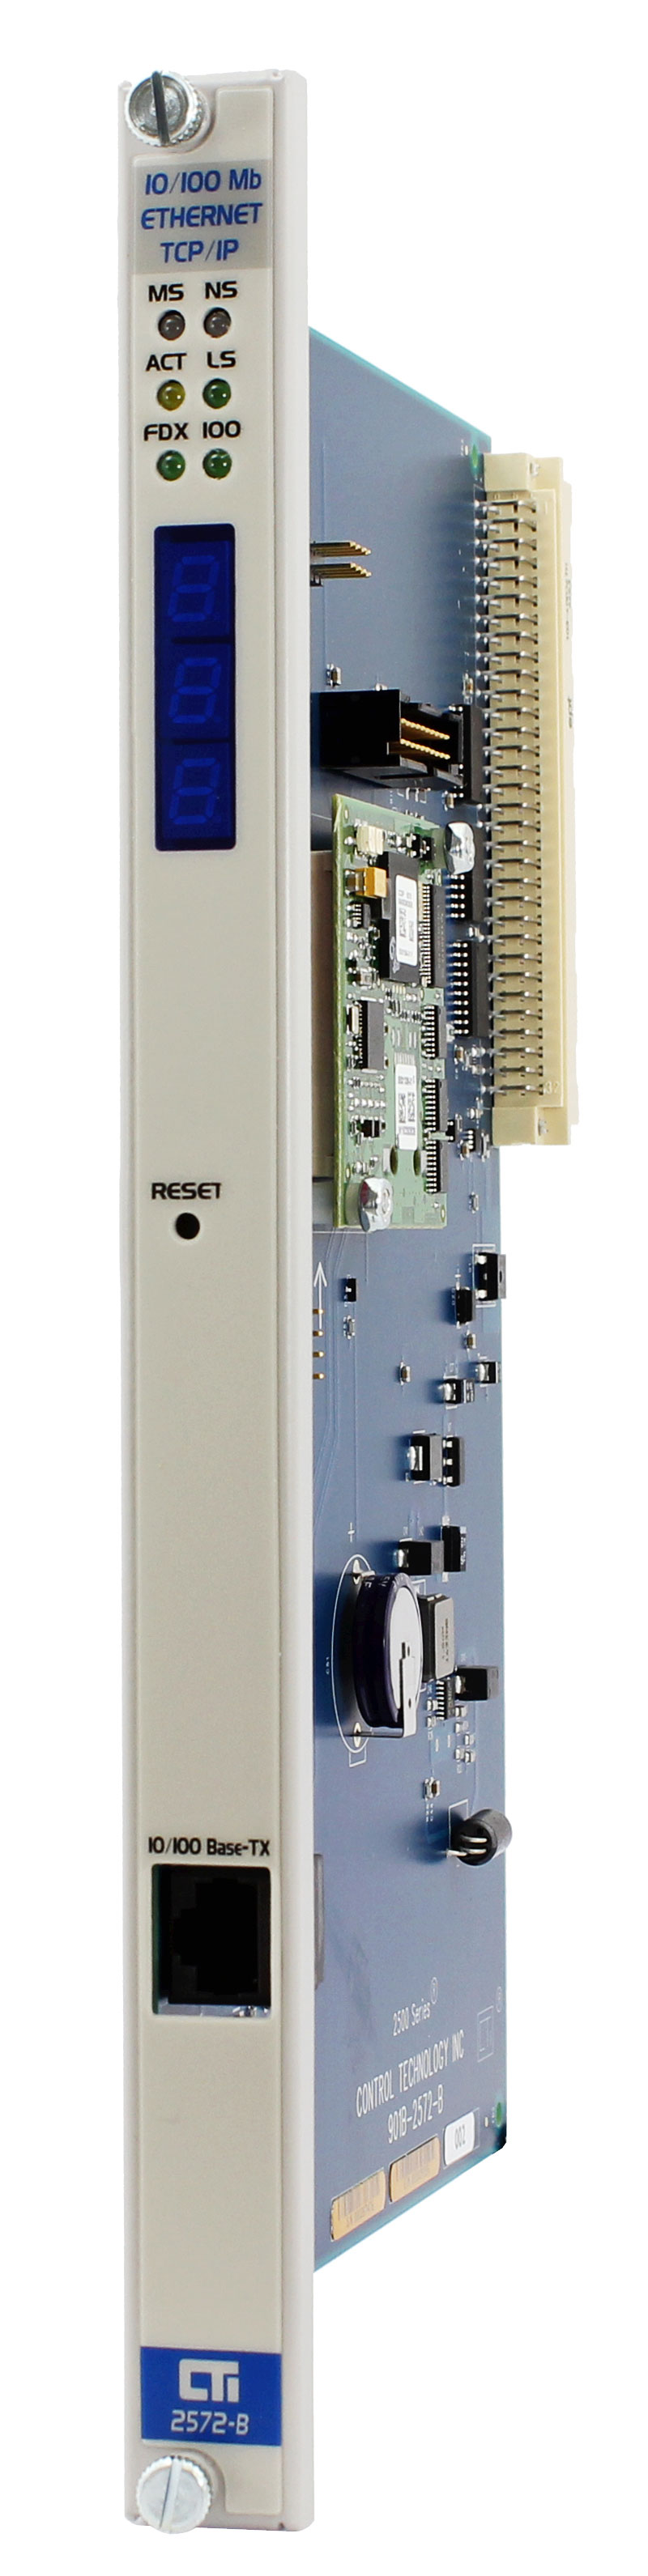 2572-B Fast Ethernet TCP/IP Adapter